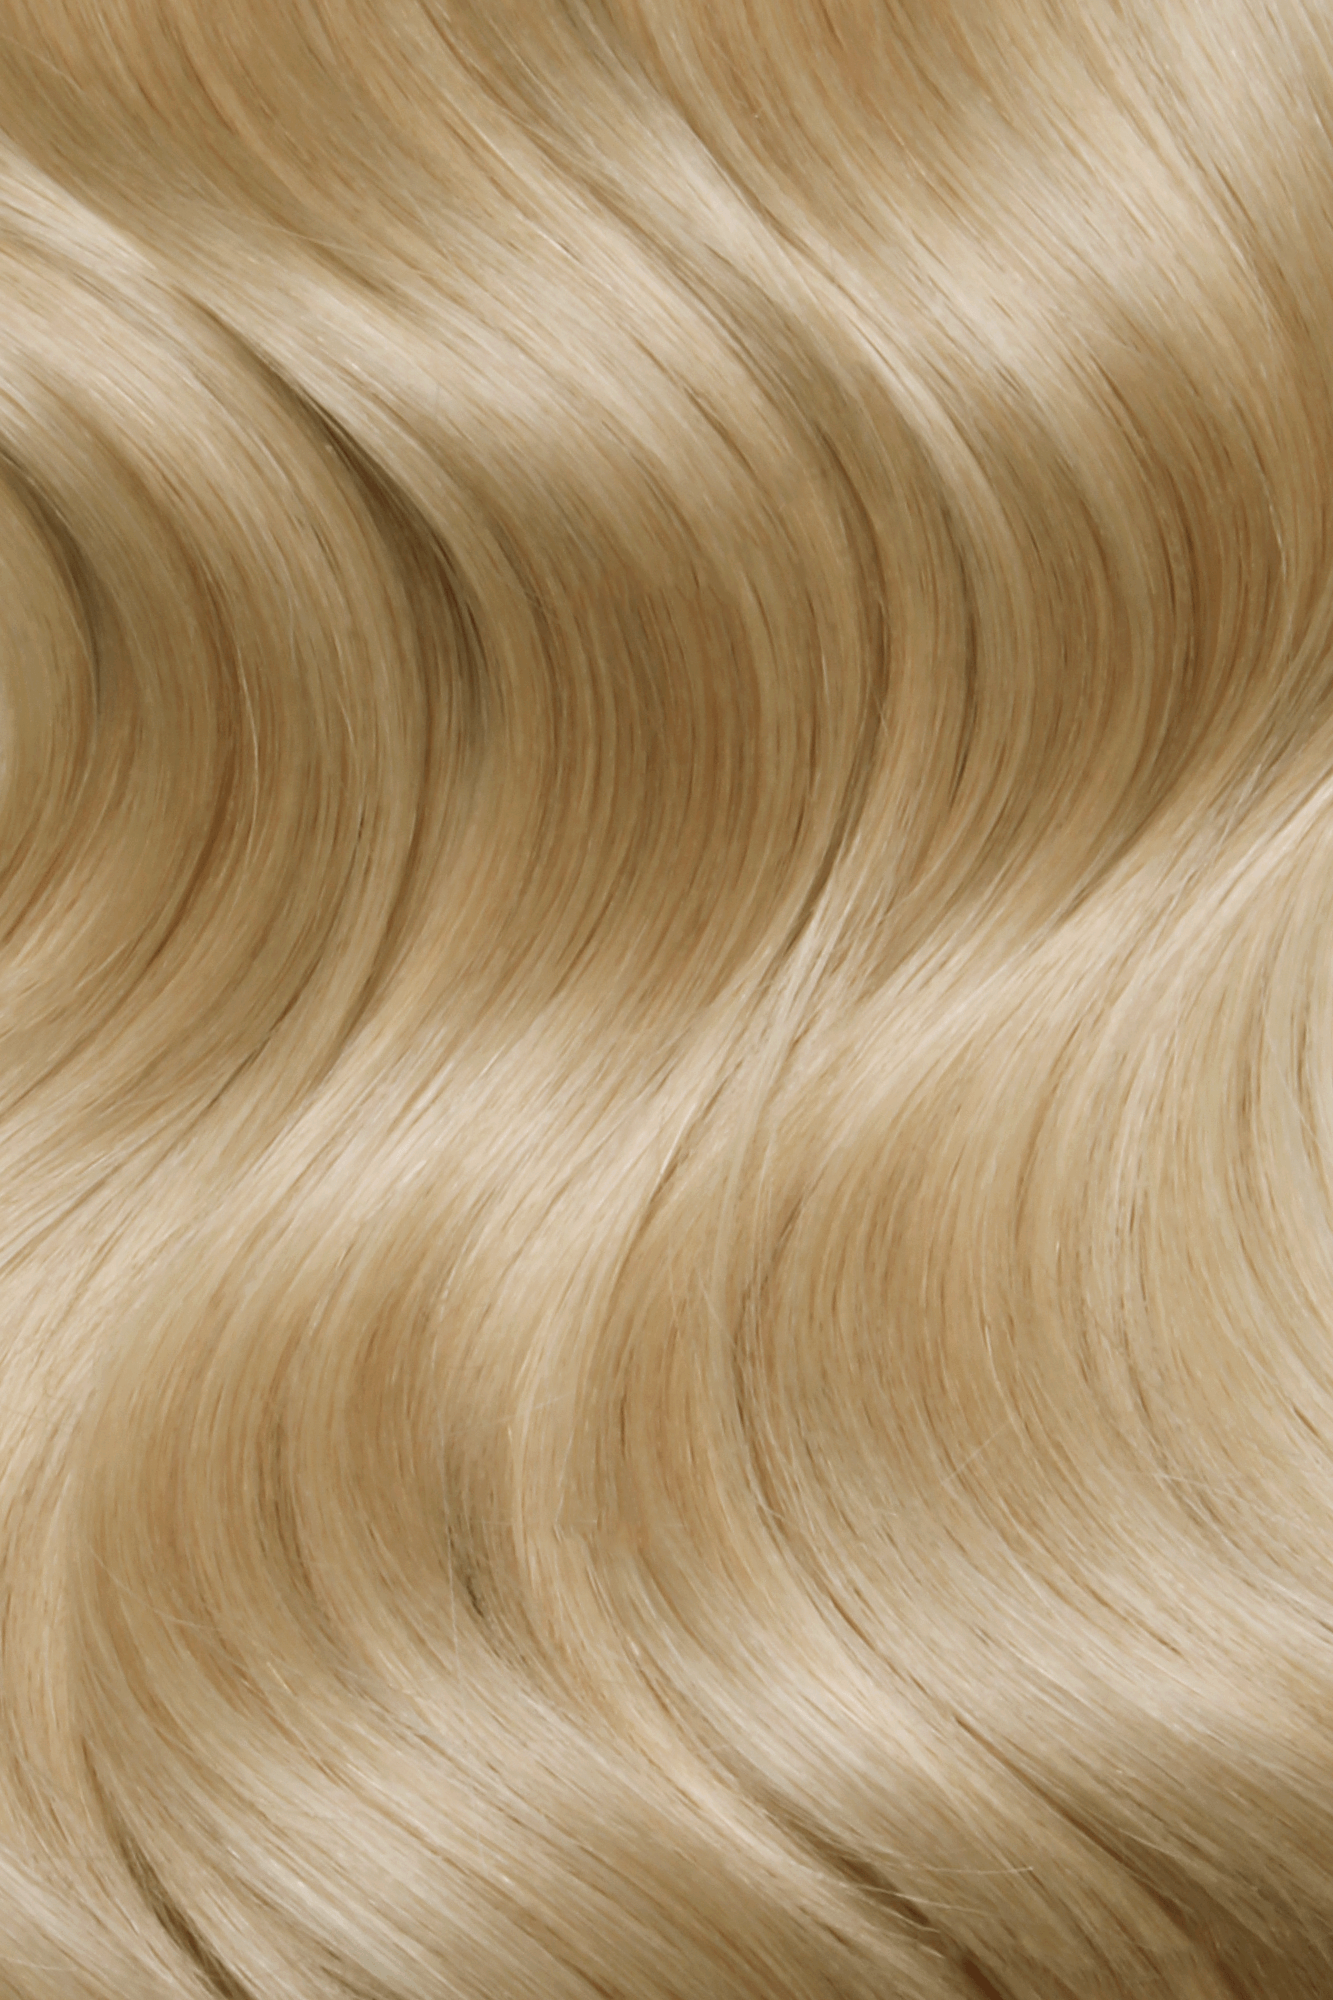 SEAMLESS® Tapes 22 Inches - SWAY Hair Extensions Natural-Ash-Blonde-20 SWAY SEAMLESS® Tapes 22 Inches - Natural, lightweight hair extensions for longer, fuller, and luxurious hair. Virtually undetectable, reusable, and perfect for any hairstyle